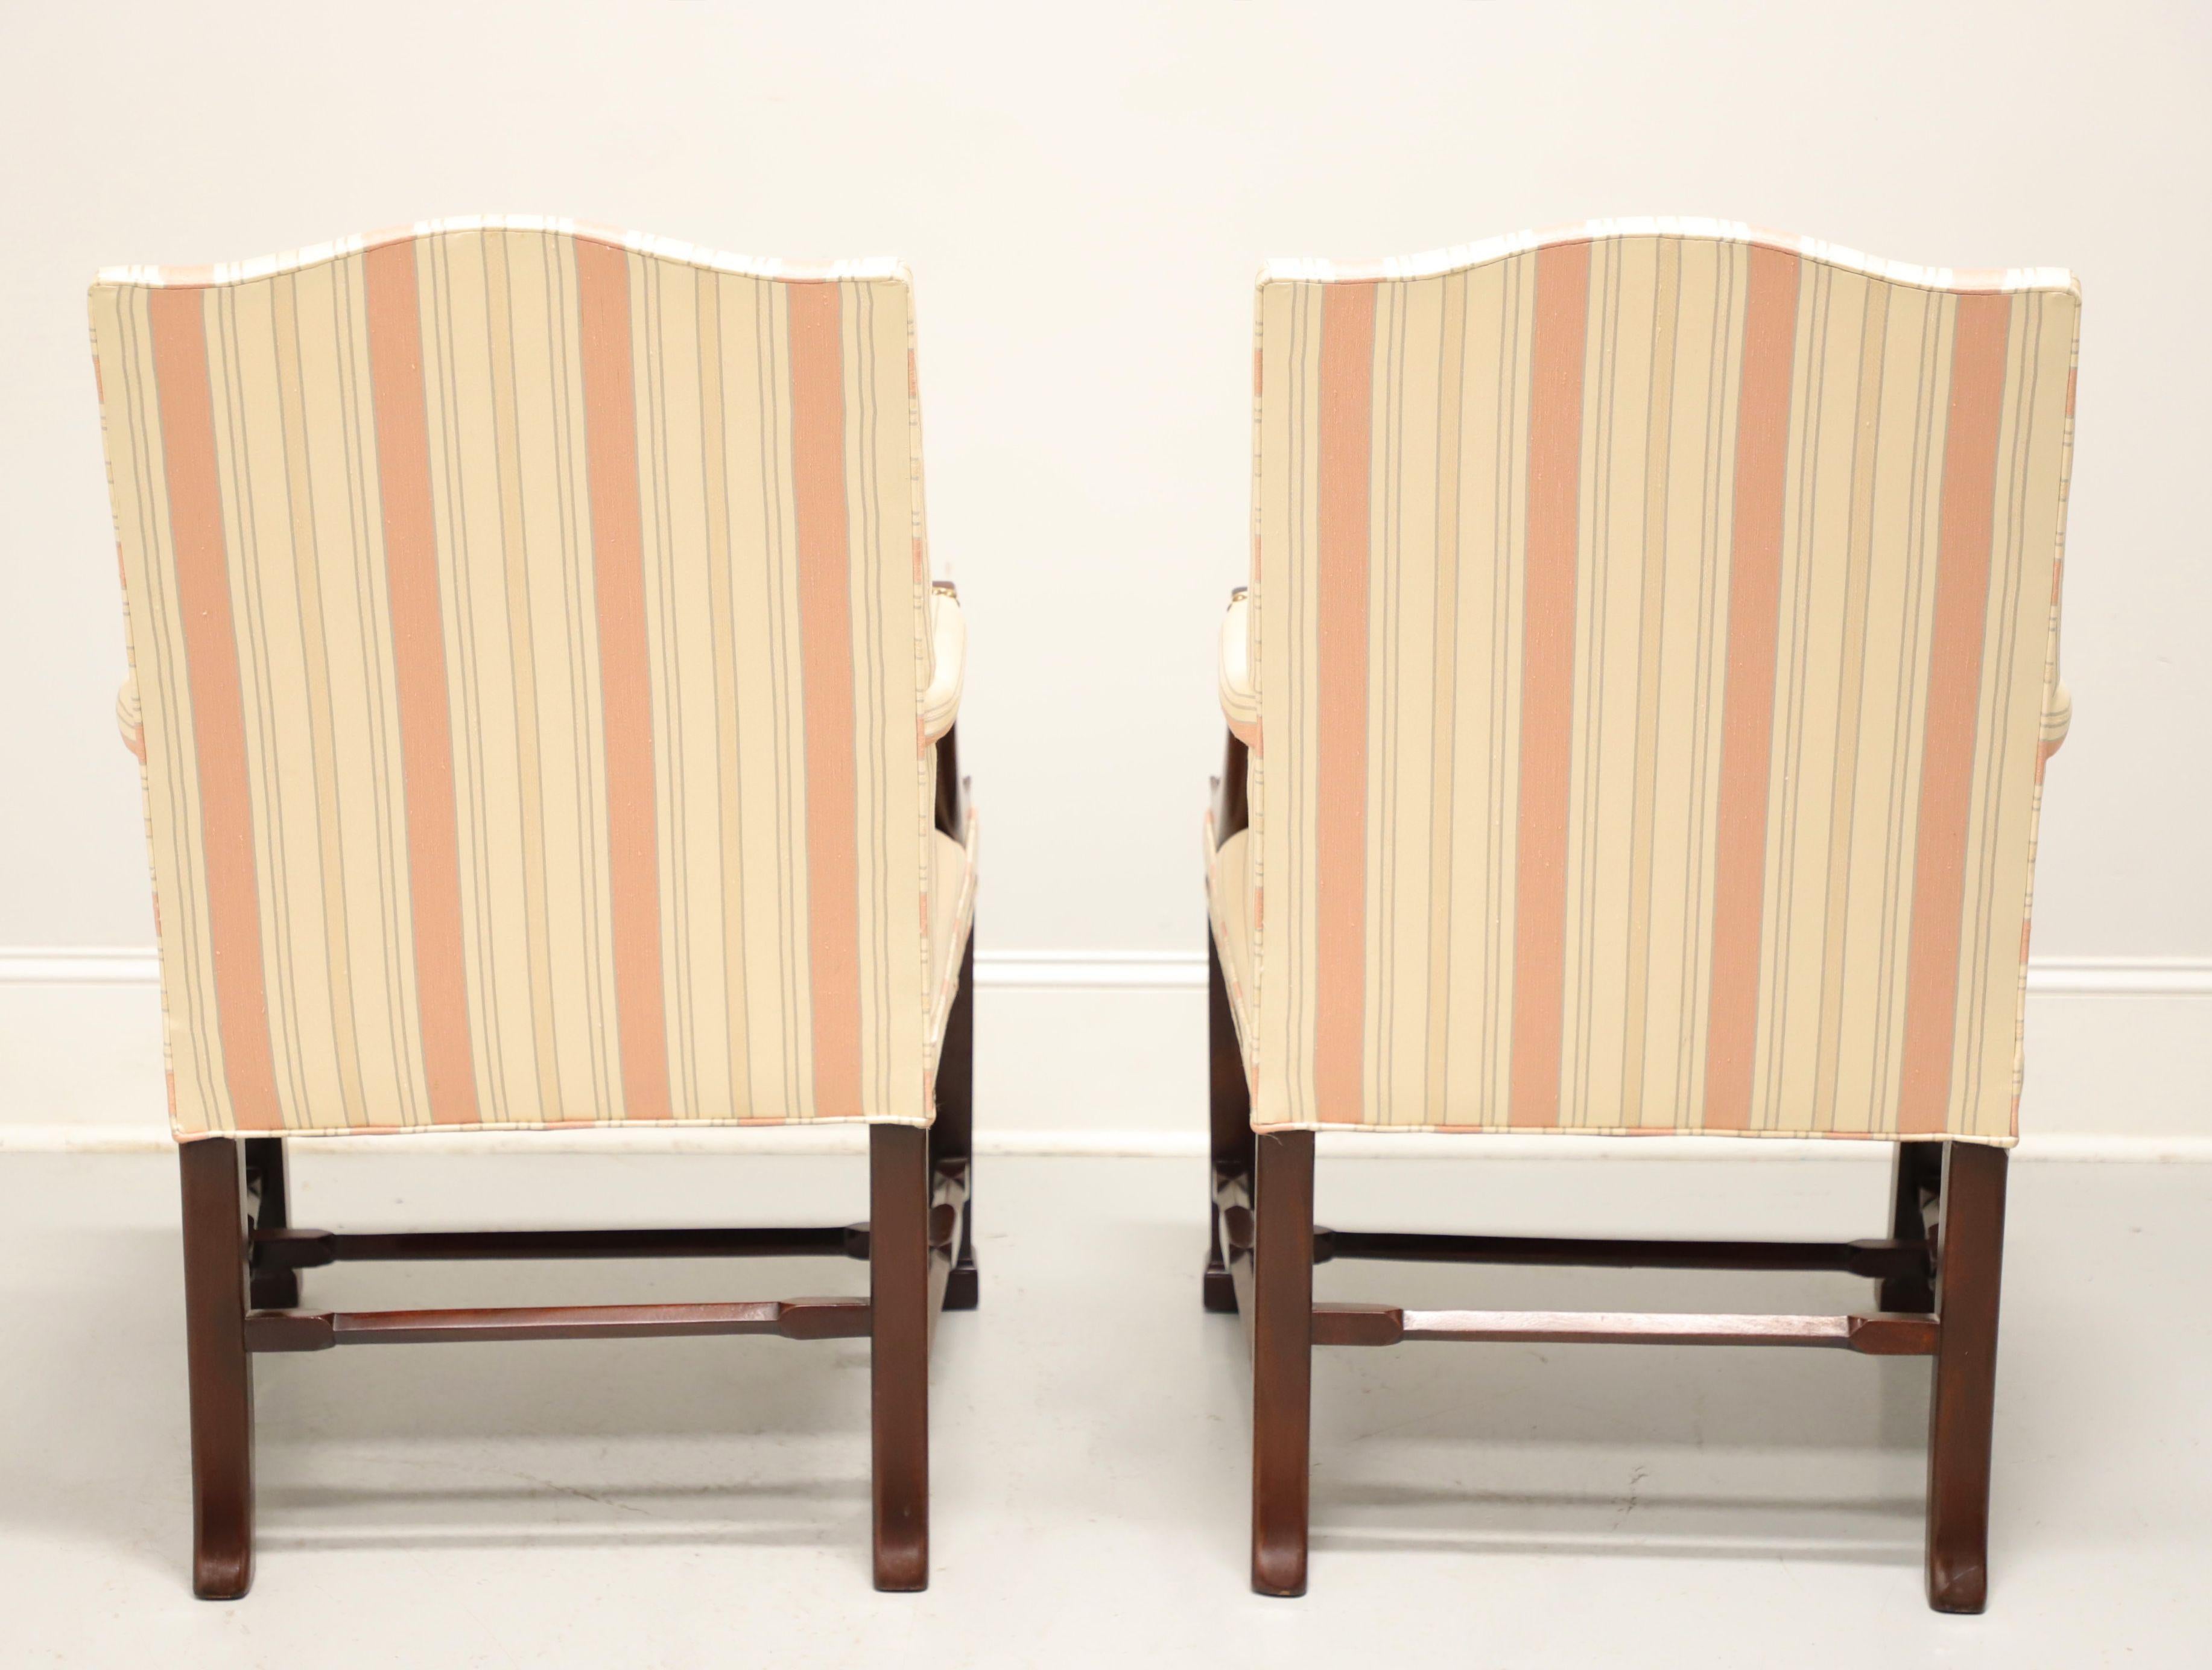 20th Century HICKORY CHAIR Wentworth Mahogany Chippendale Style Fretwork Armchairs - Pair